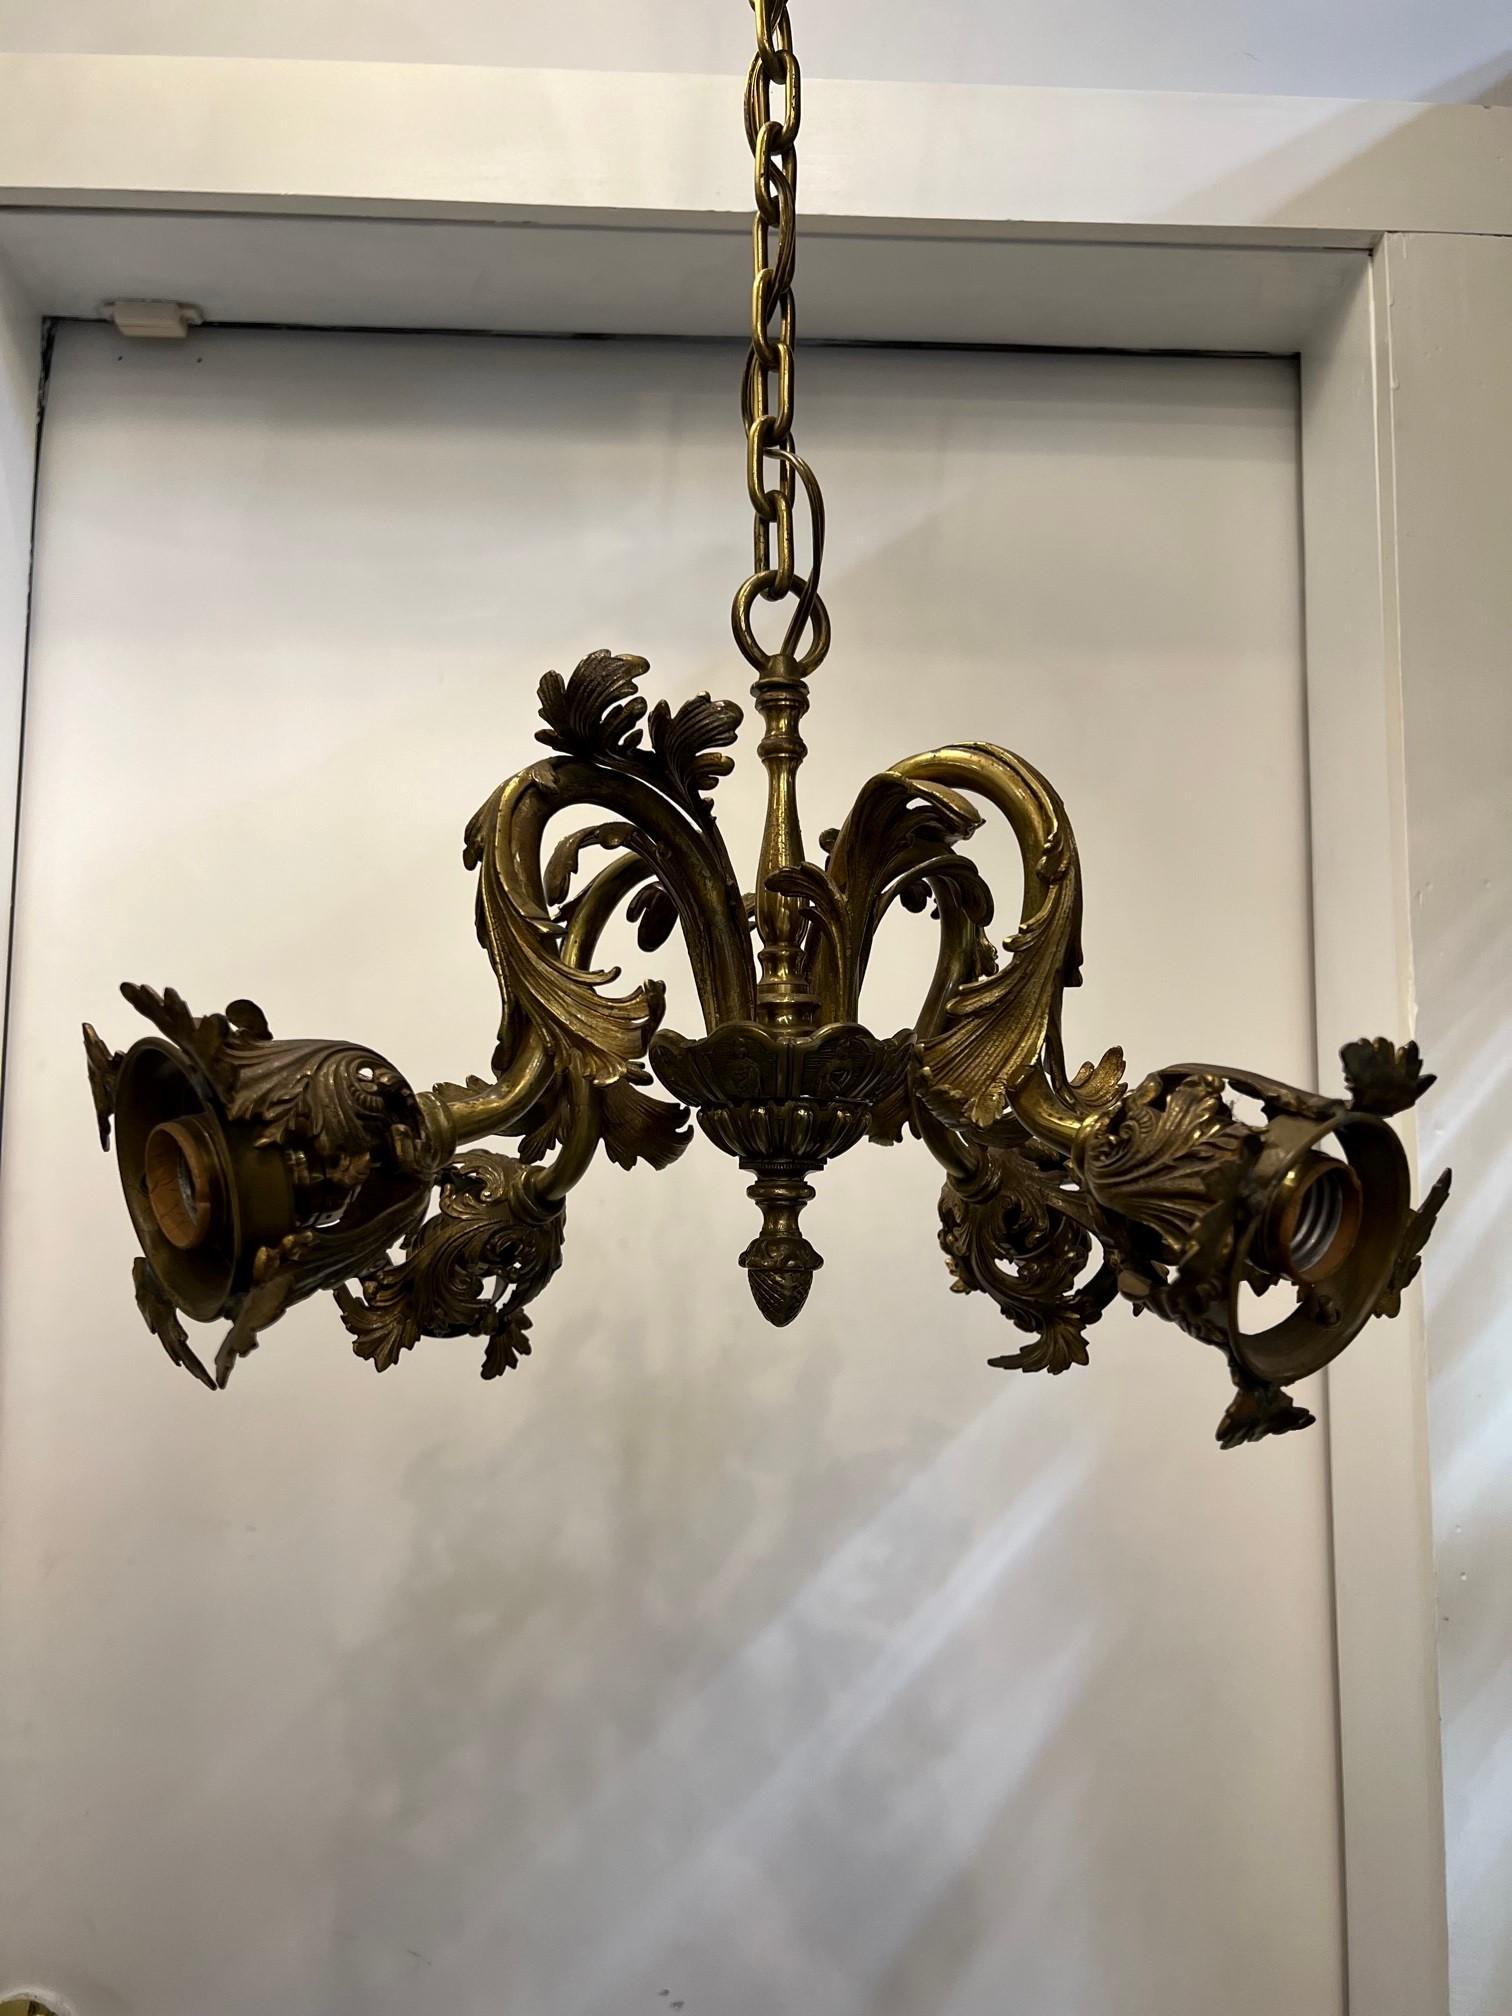 A small but very nice French Louis XVI style chandelier. Four decorative bronze branches each with sockets all in working condition. I do not have the glass shades, originaly it had four art glass shades which you can replace with reproduction glass